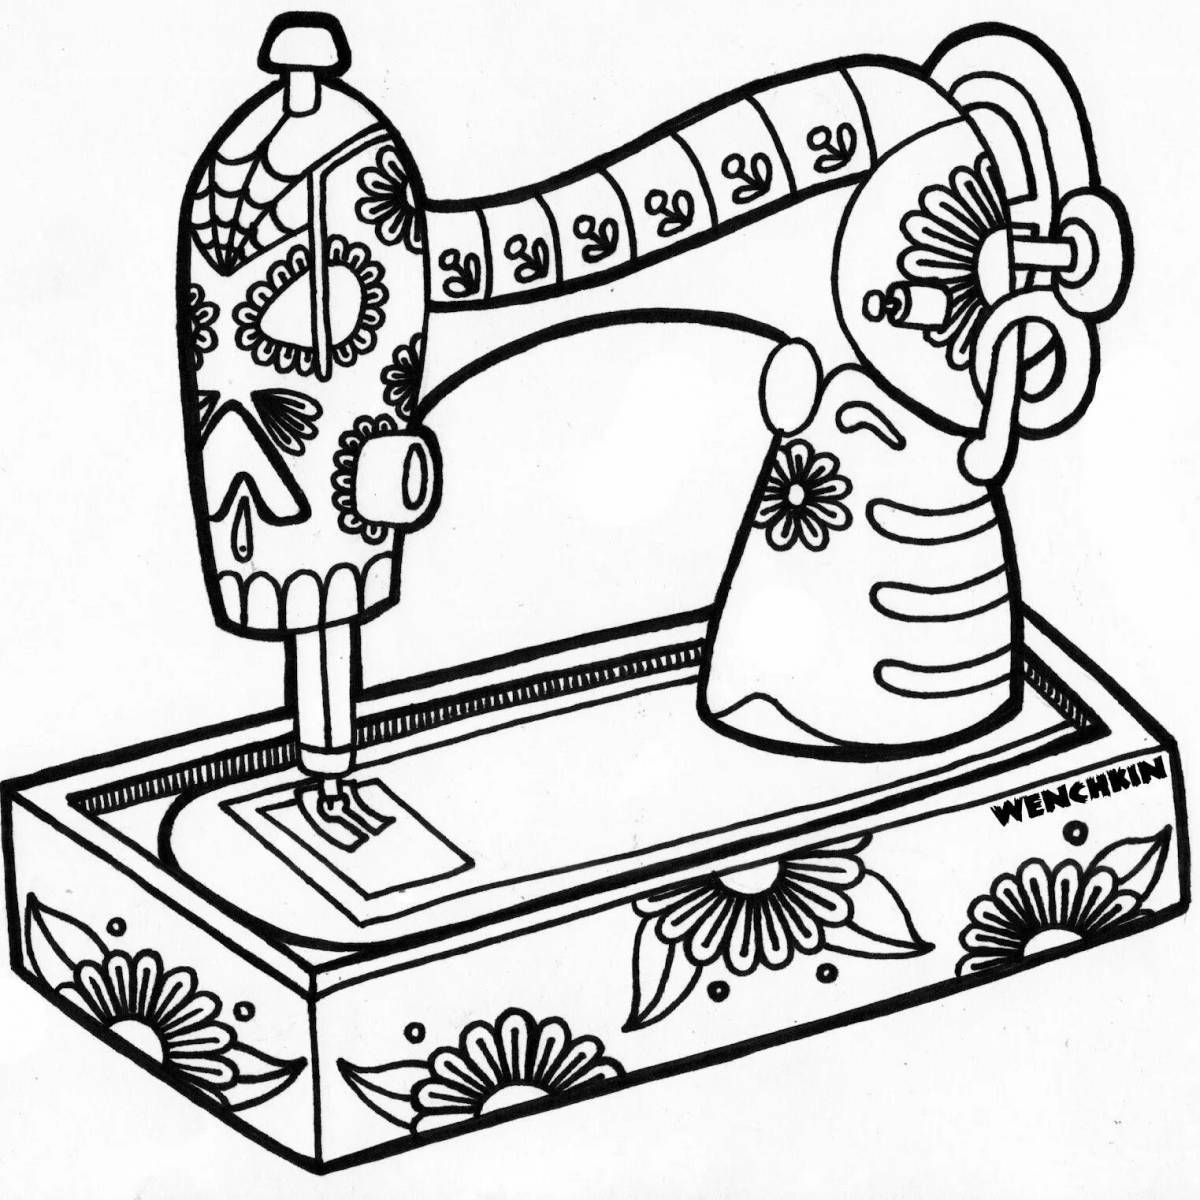 Fabulous sewing machine coloring page